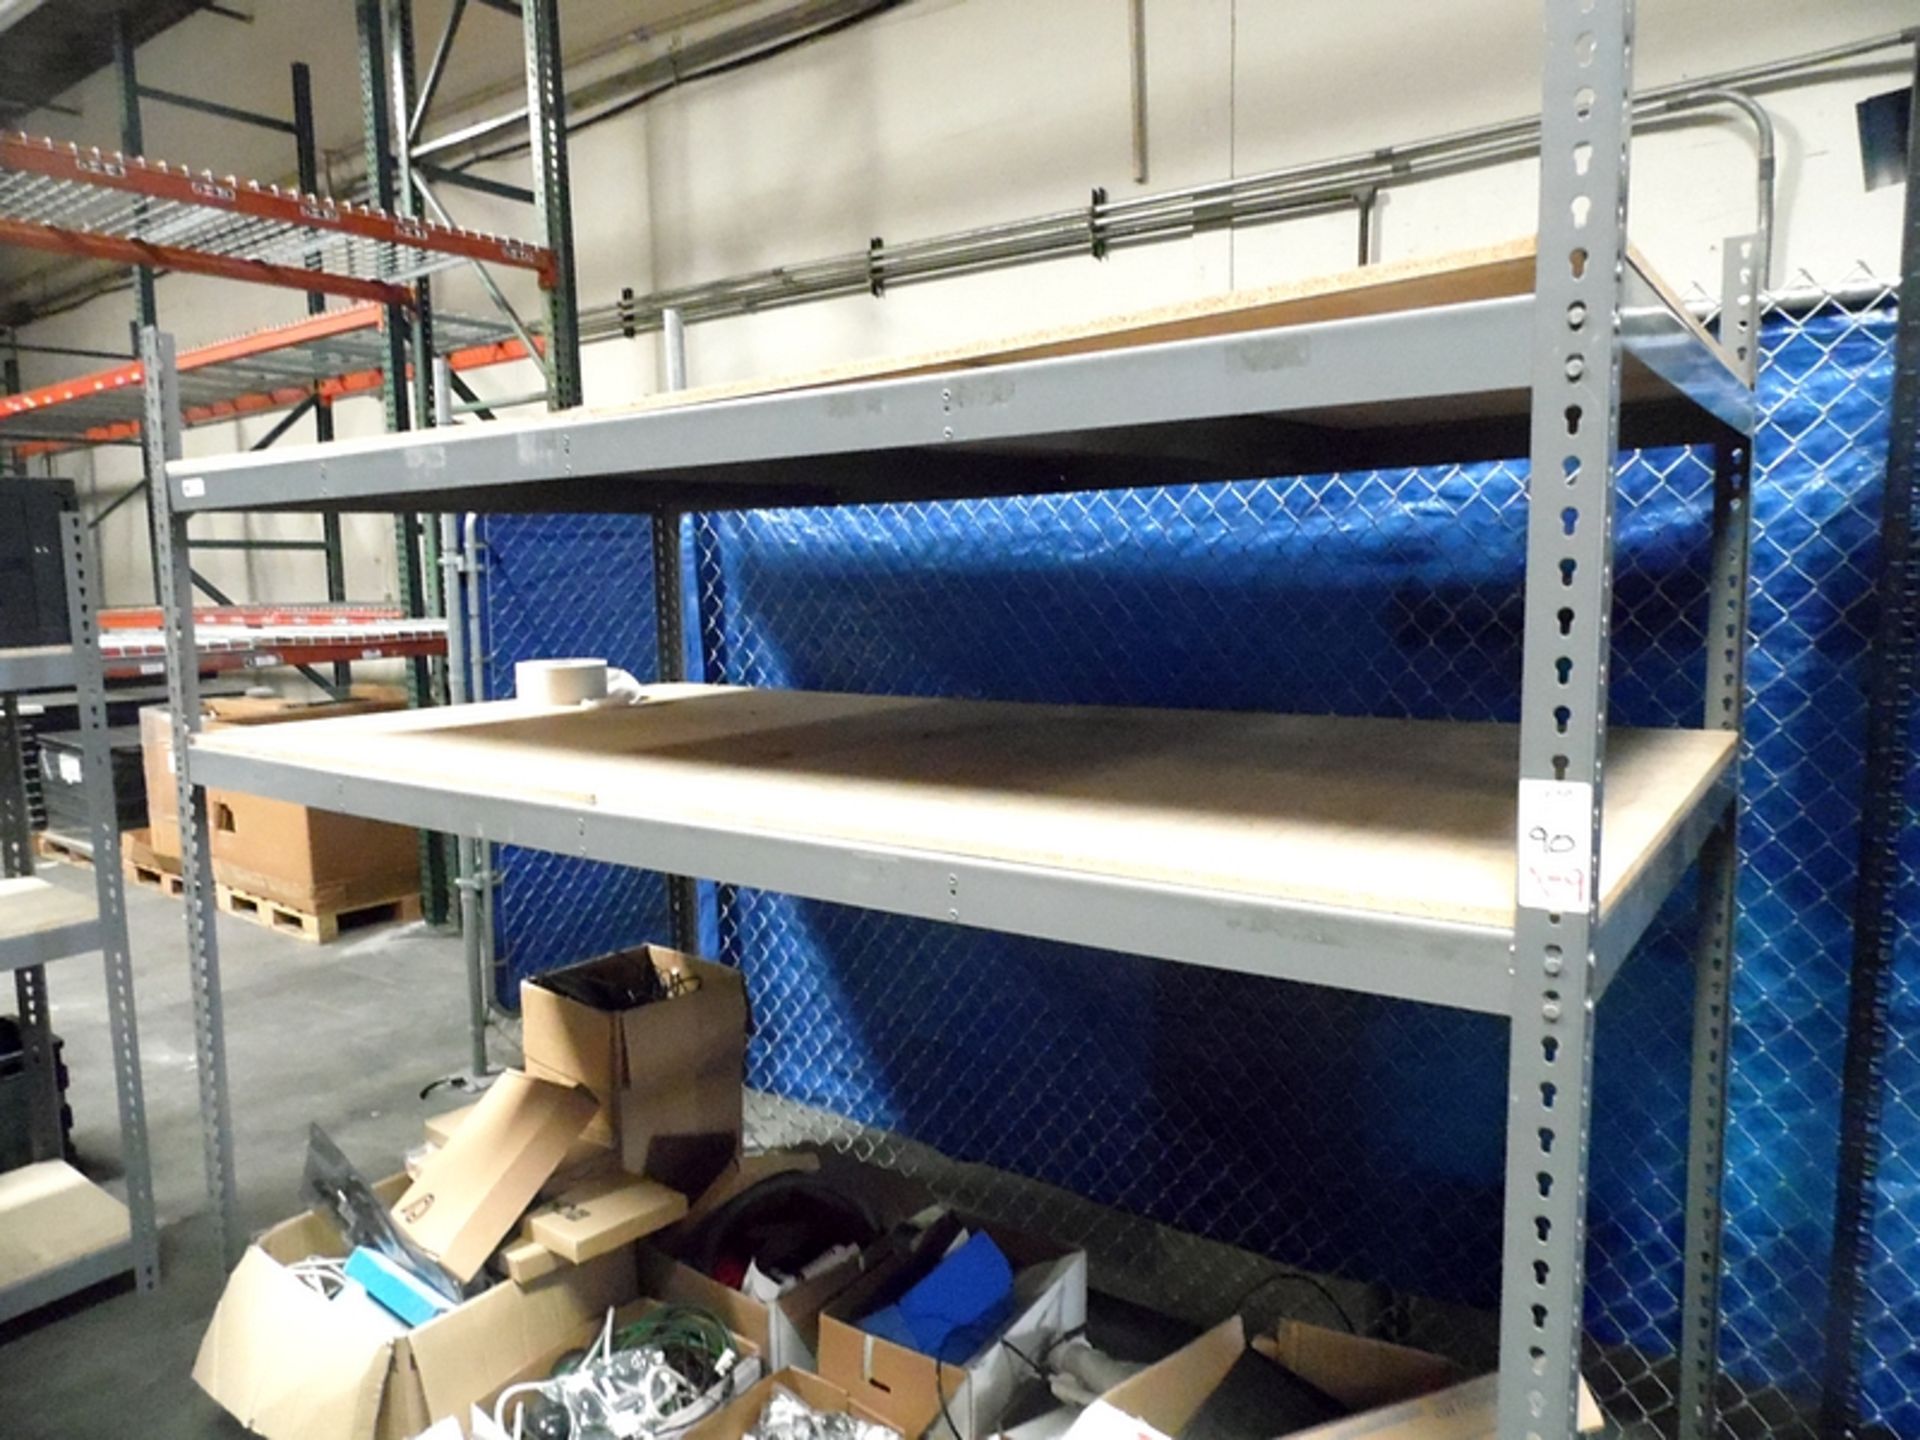 SECTIONS GRAY SHELVING